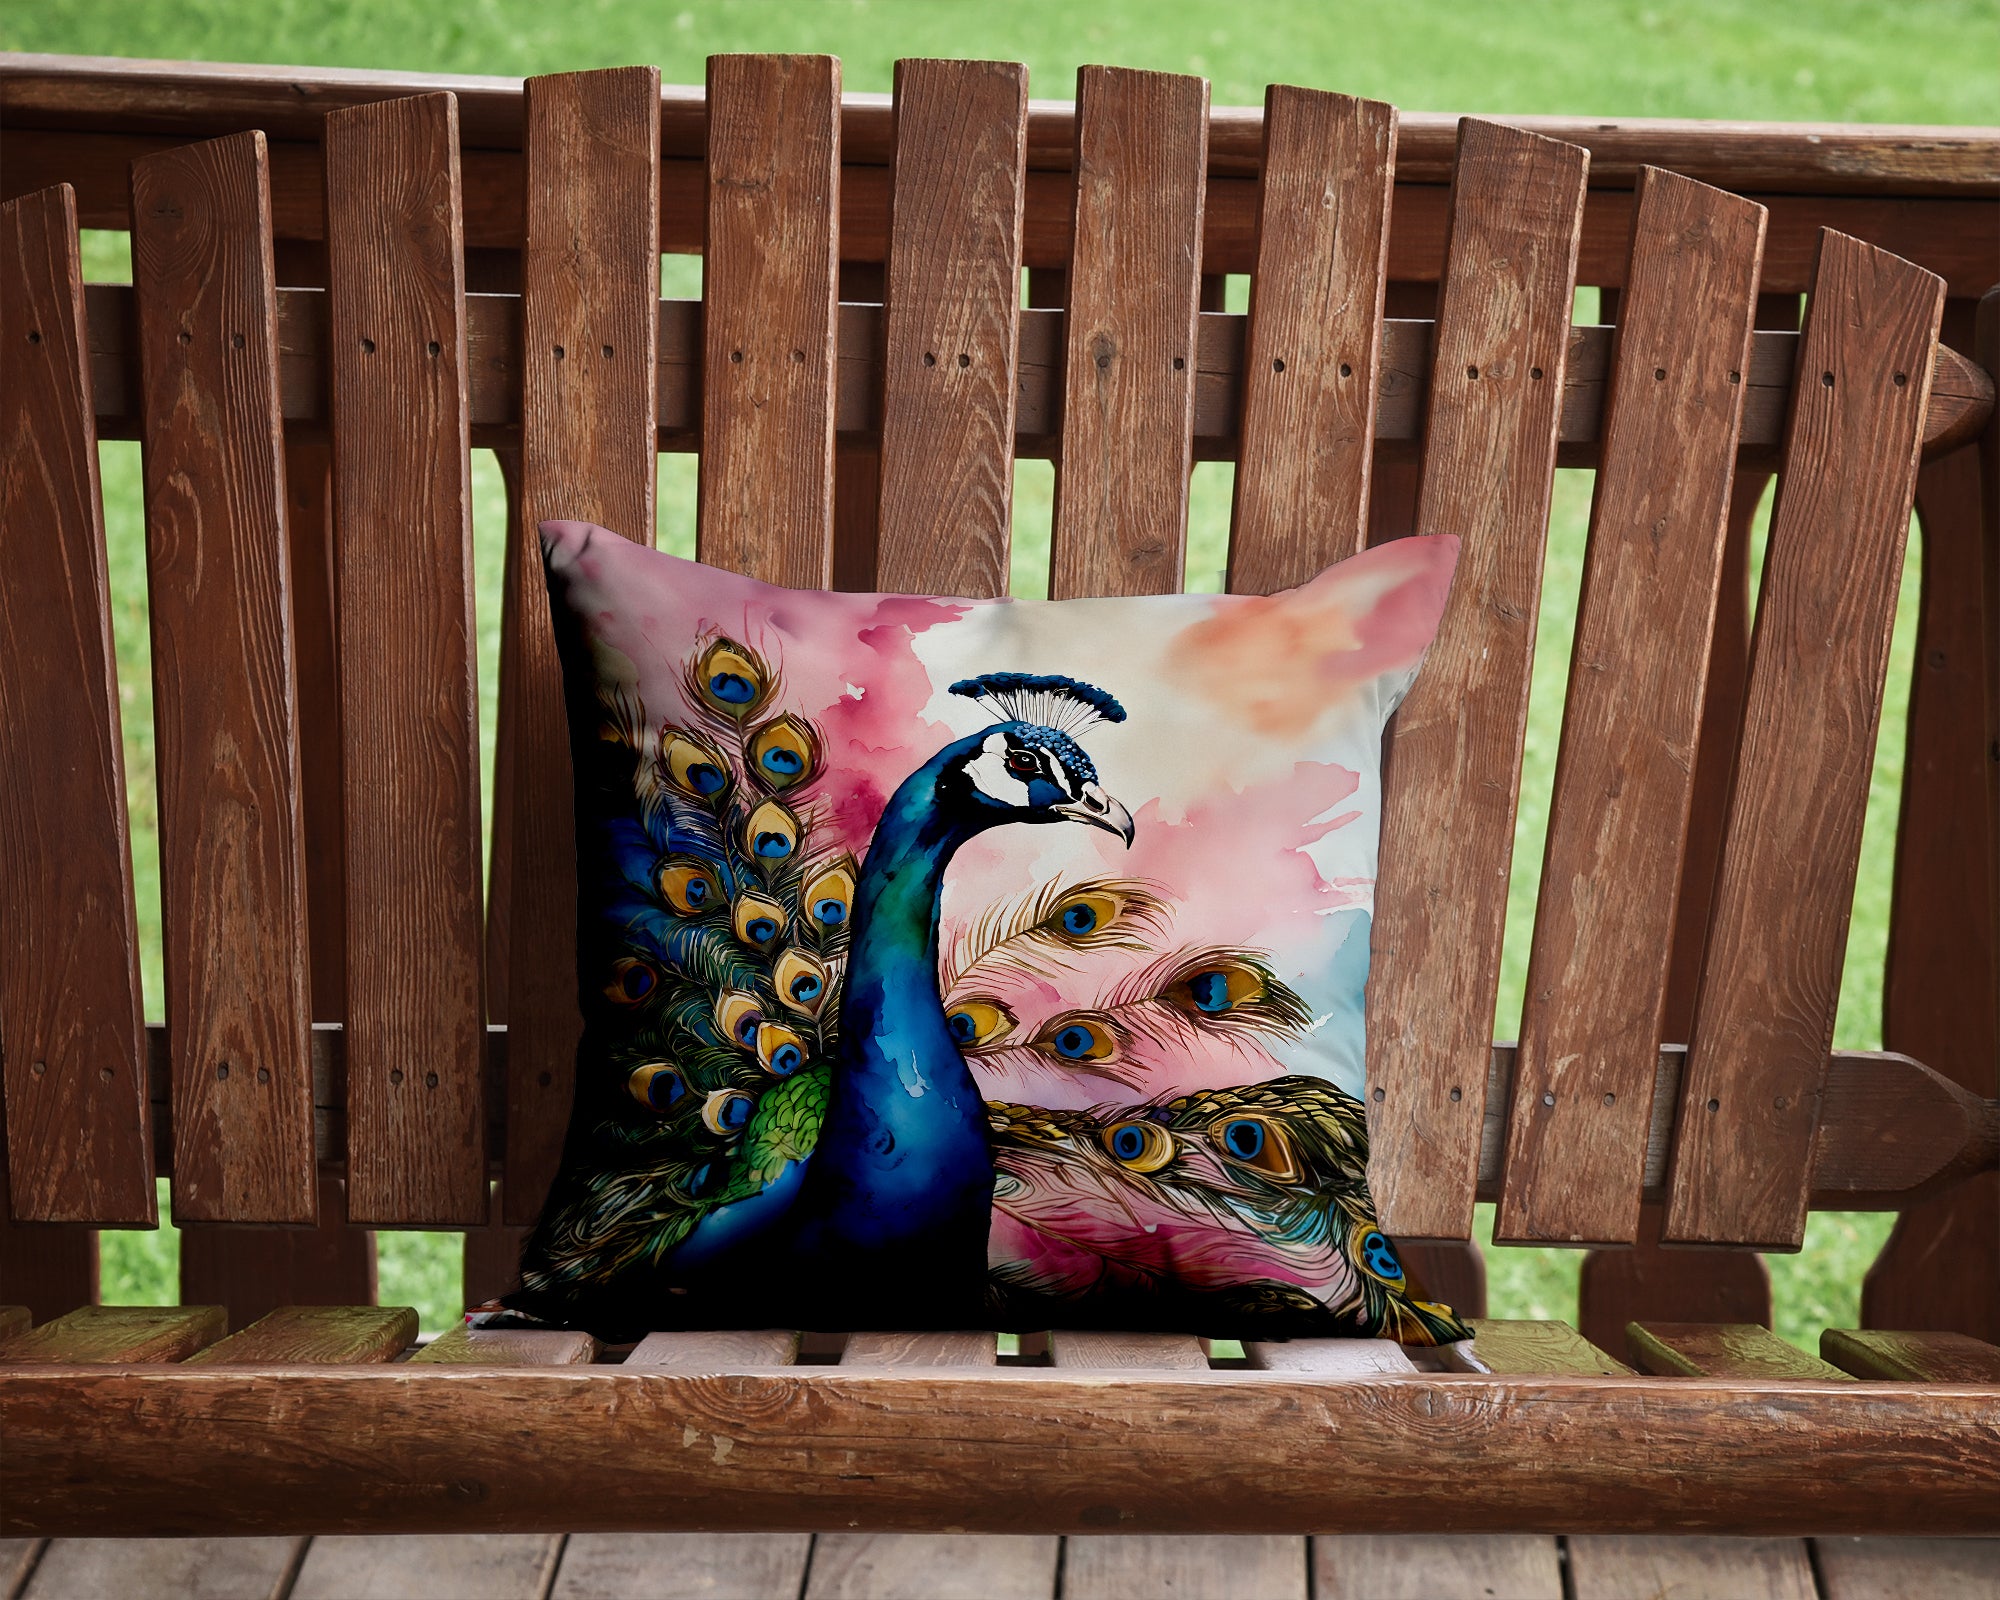 Buy this Peacock Throw Pillow